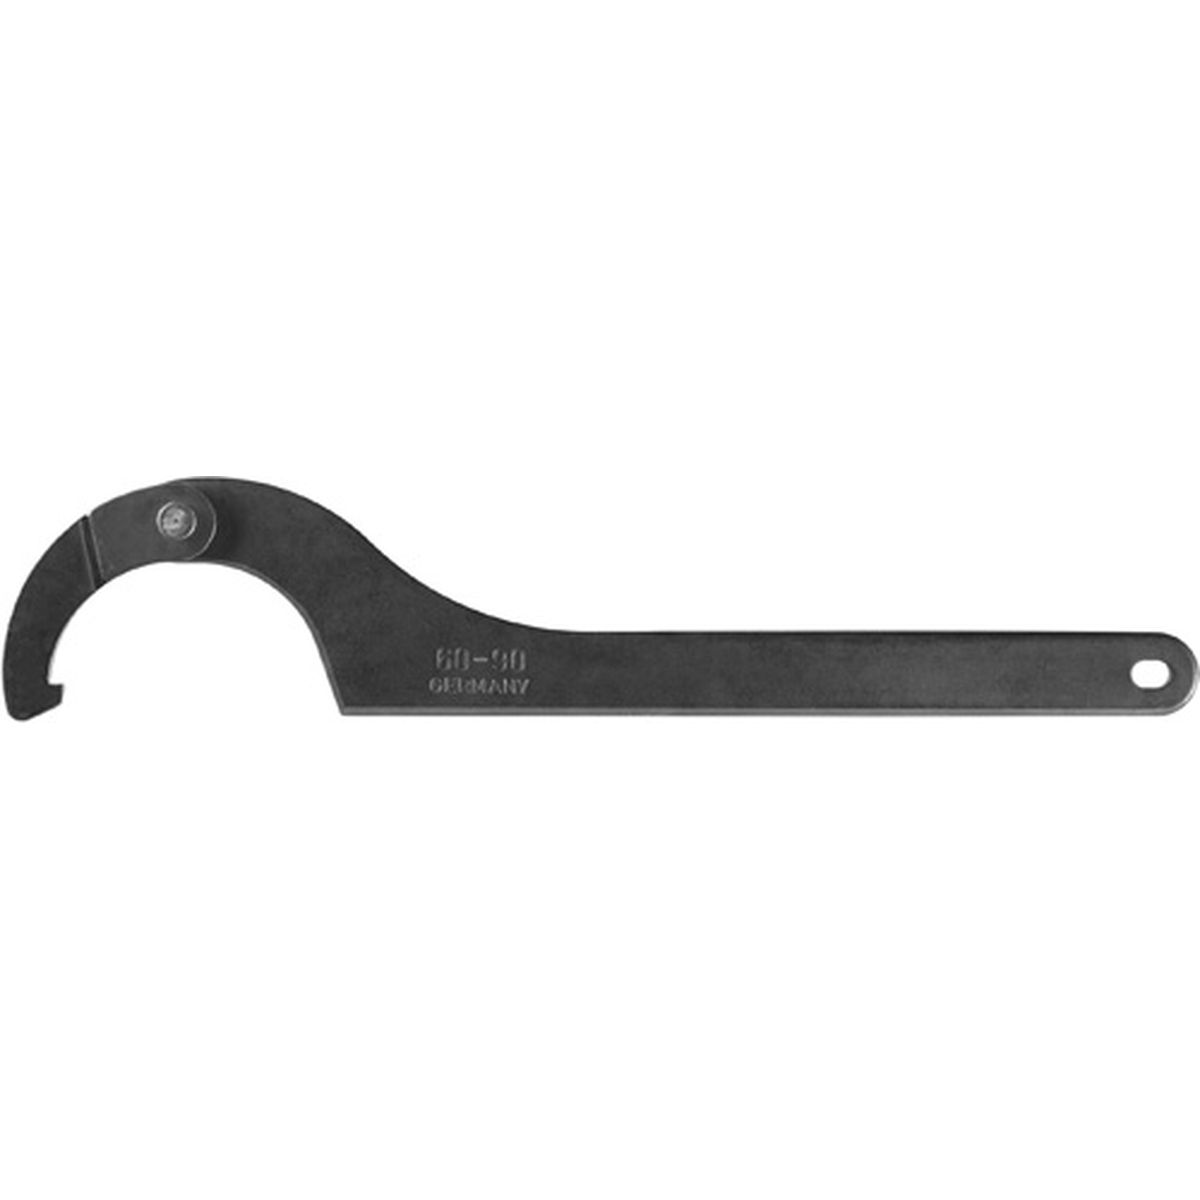 775C 35- 60 Hinged hook wrench with nose AMF